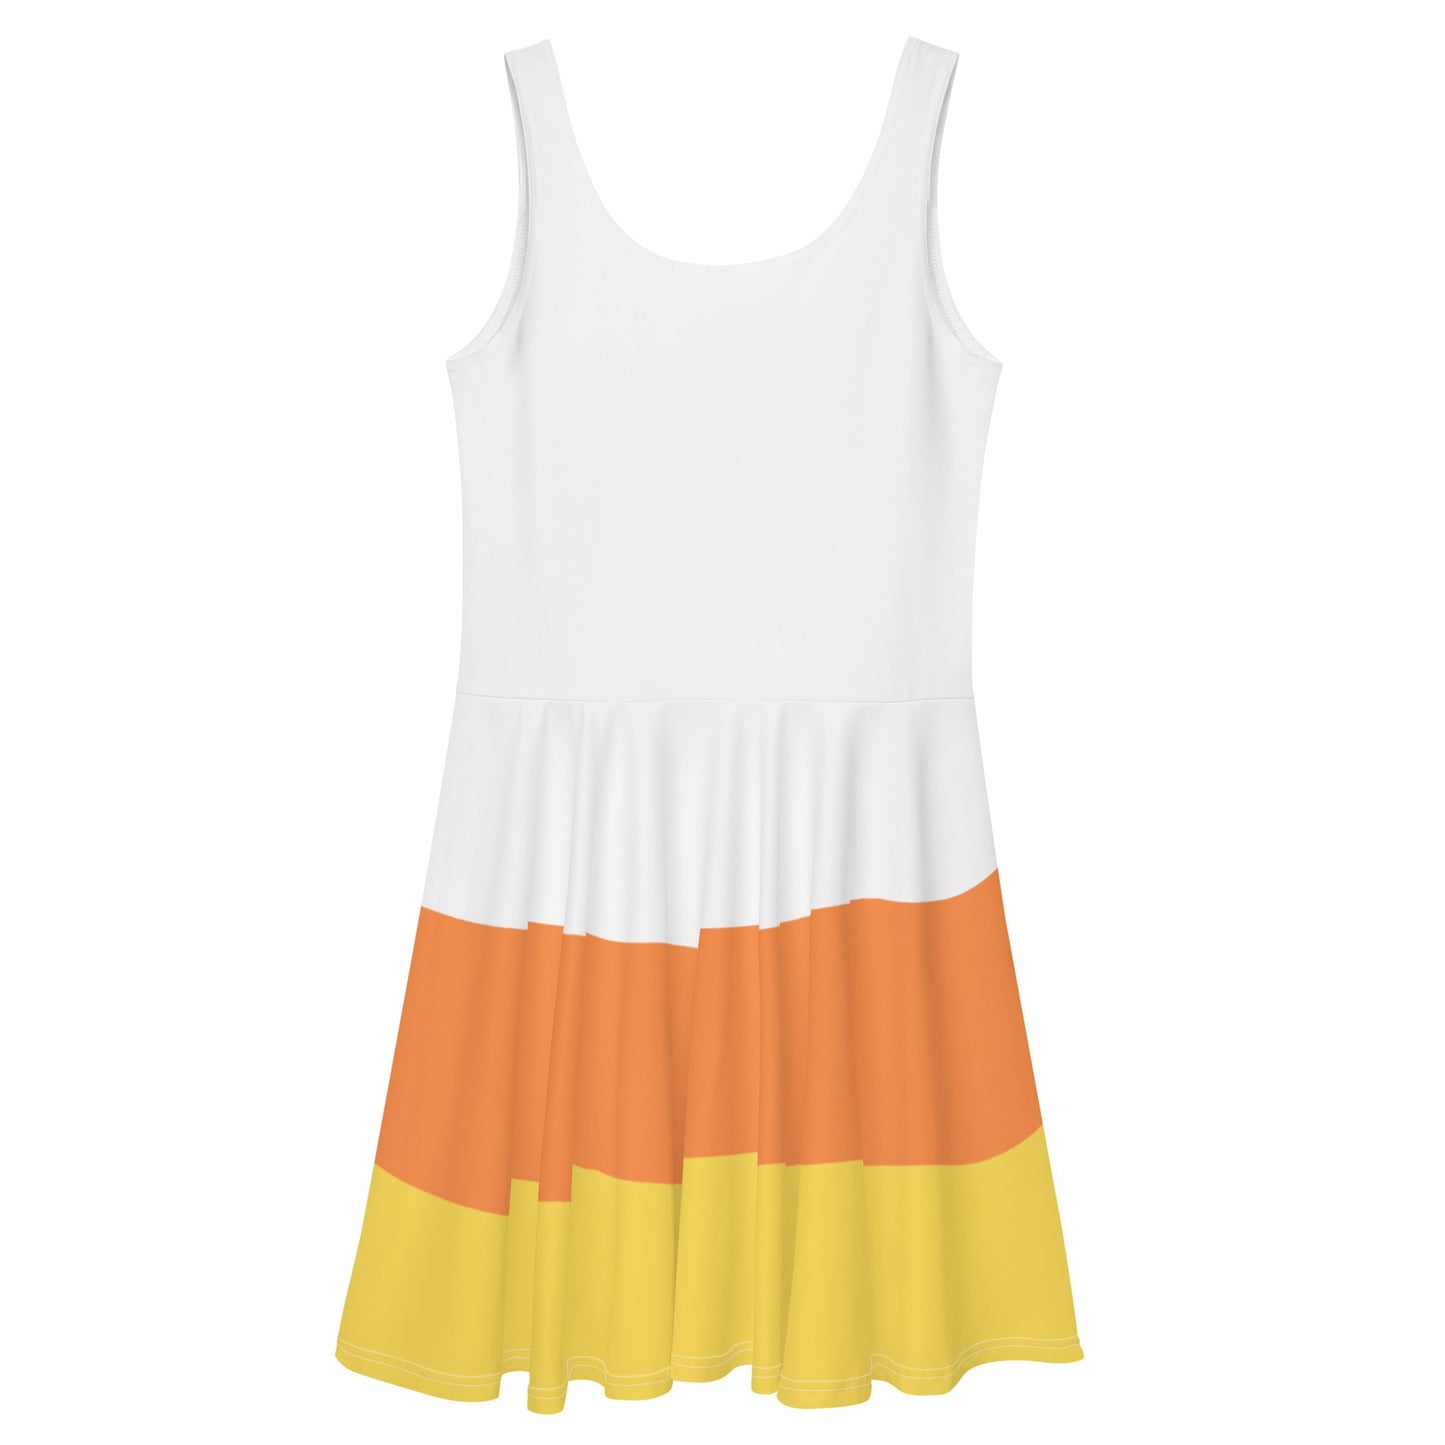 Candy Corn Skater Dress boo to youboundingcandy corn#tag4##tag5##tag6#